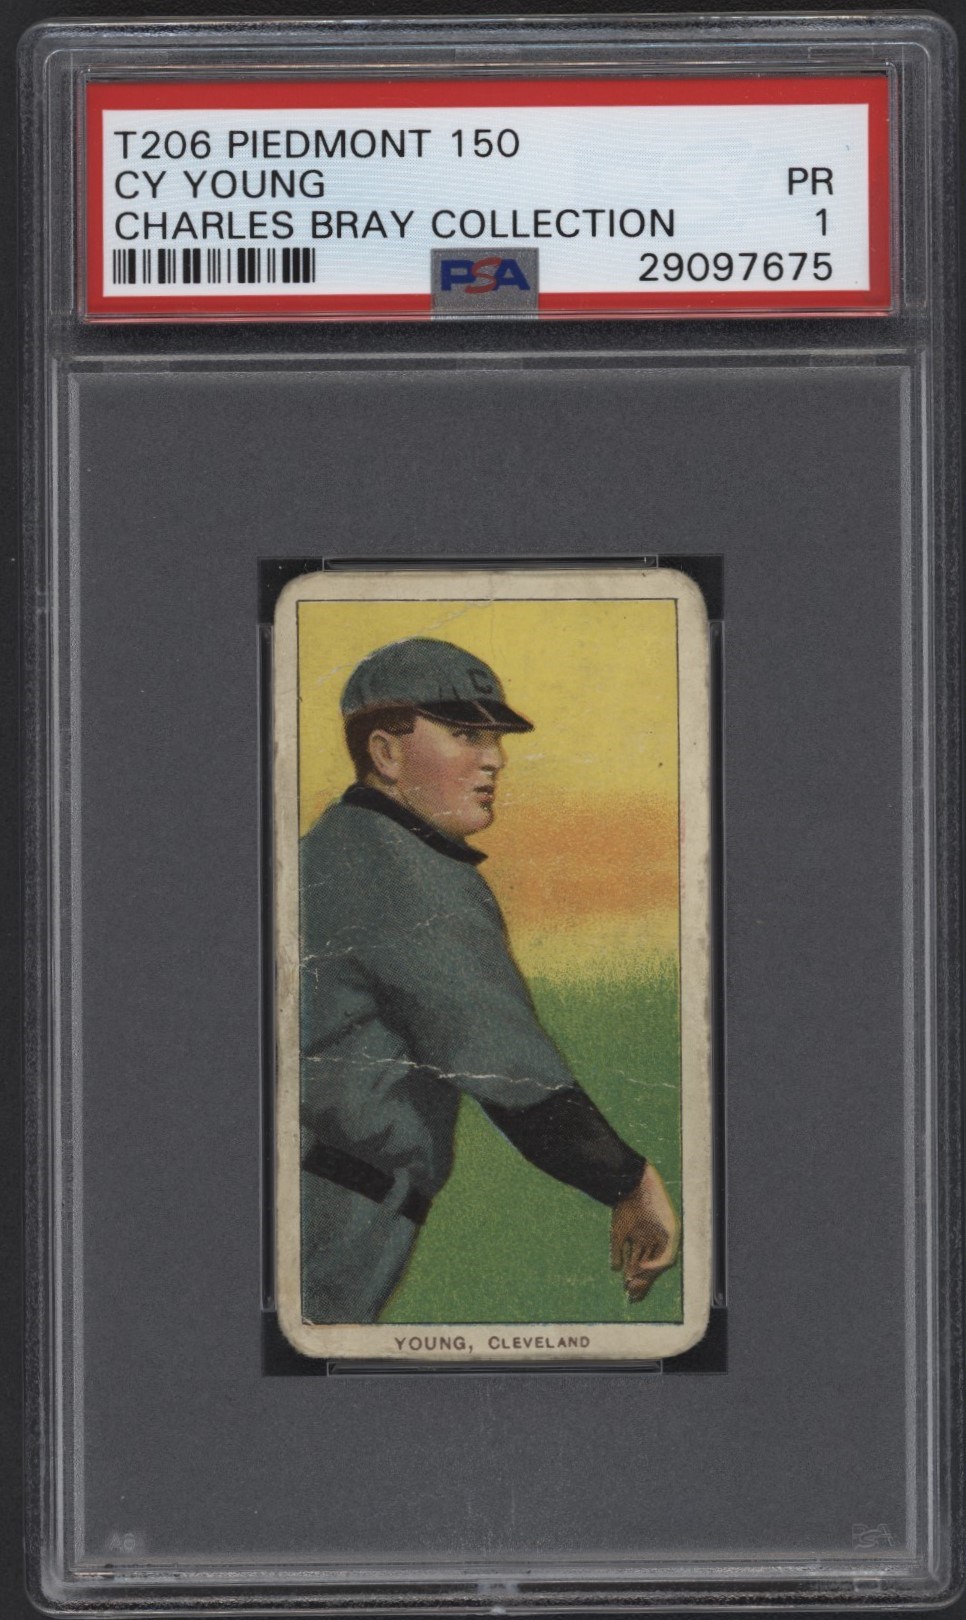 - T206 Piedmont Cy Young Bare Hand PSA 1 From the Charles Bray Collection.